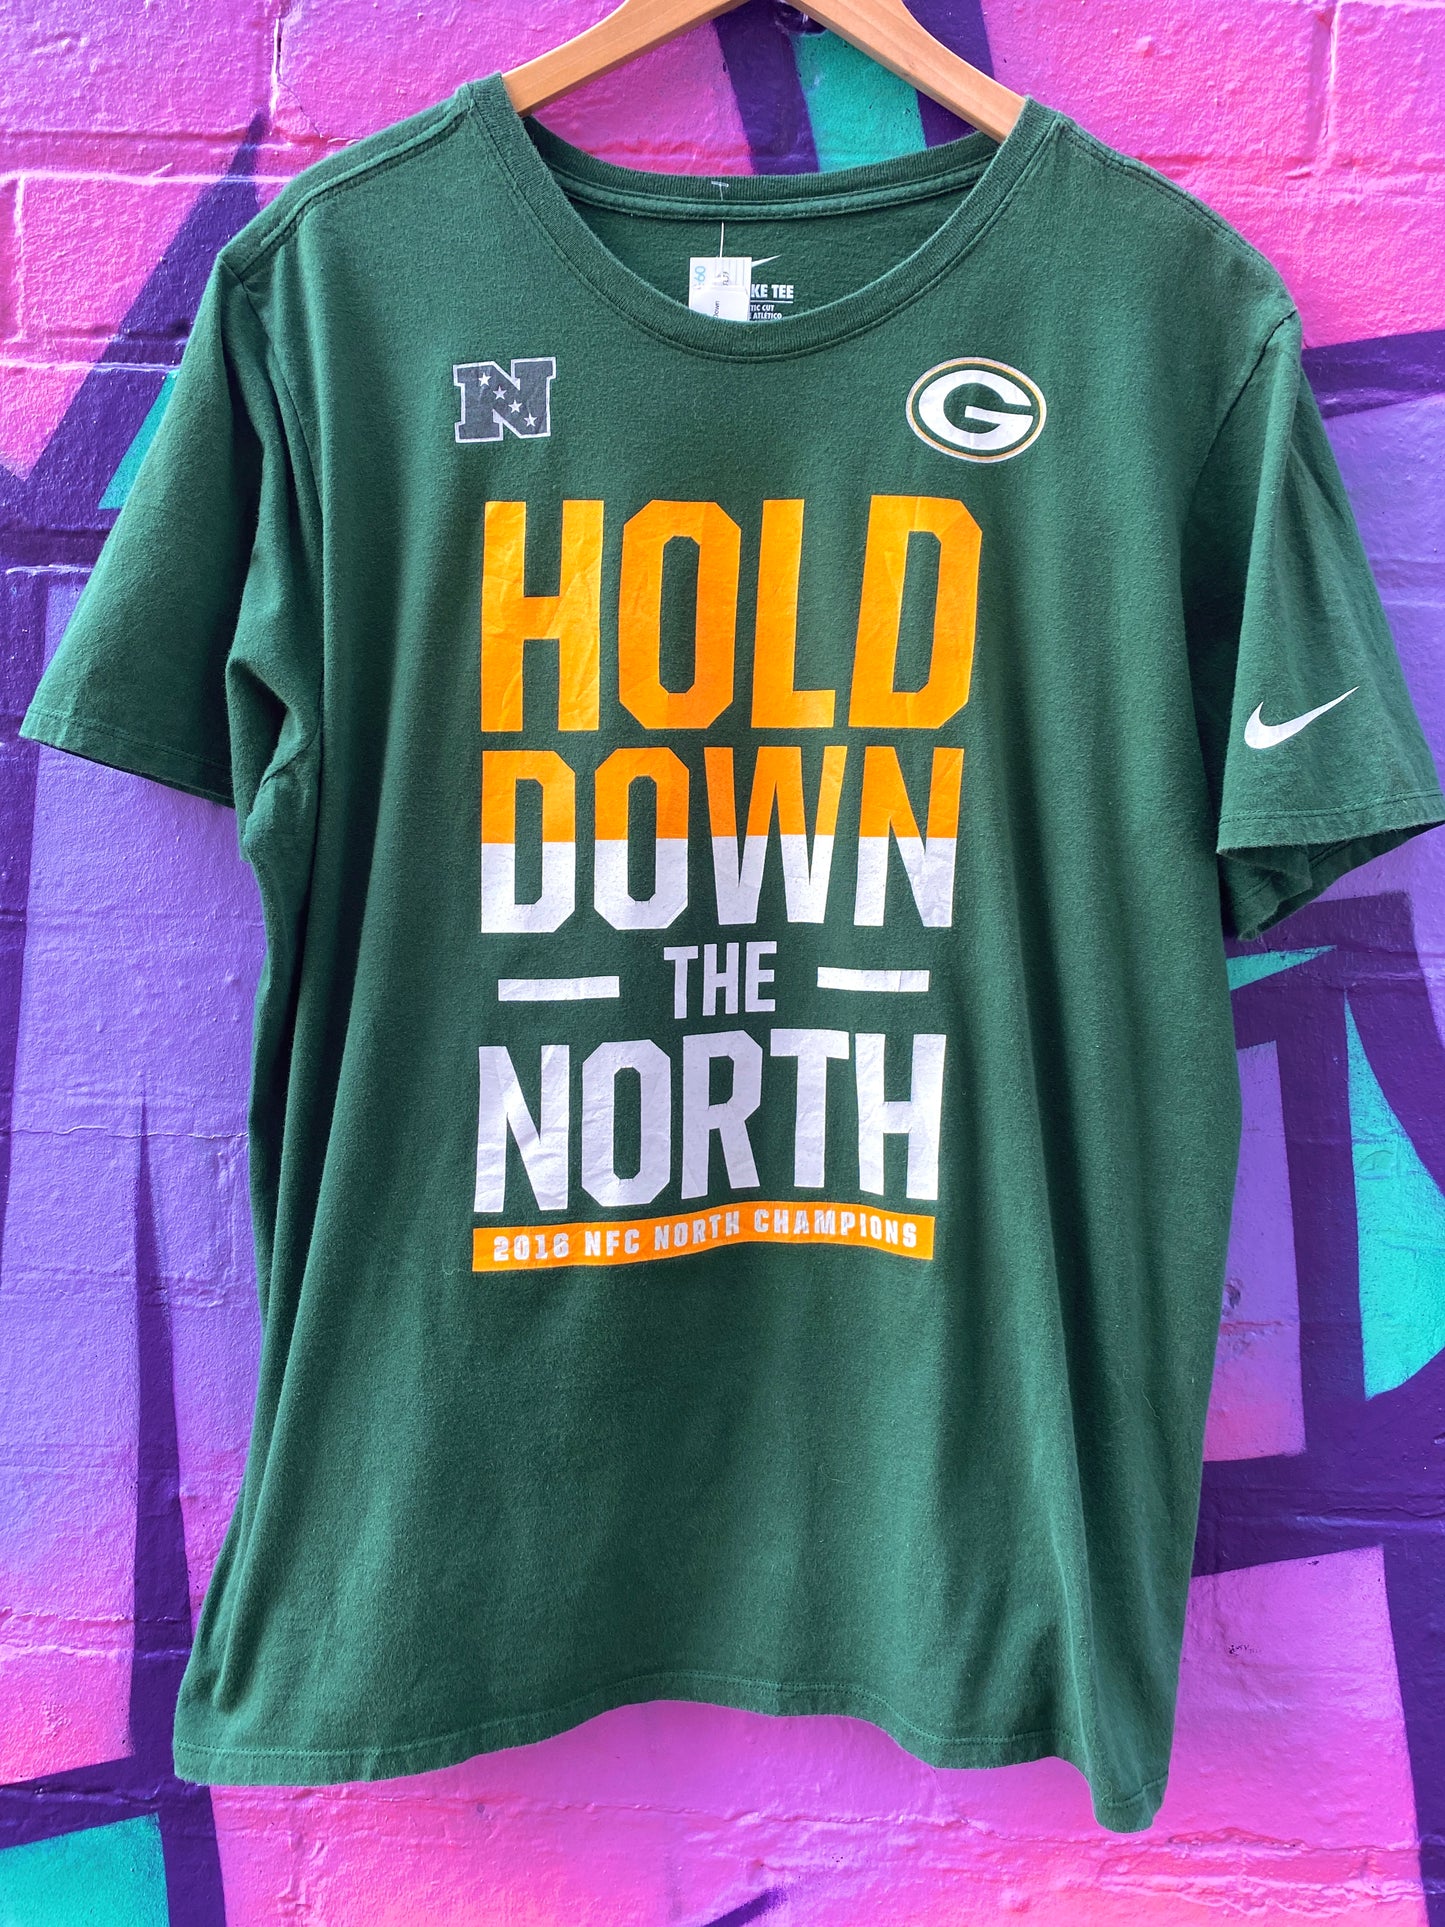 XL - 2016 Green Bay Hold Down The North Tee